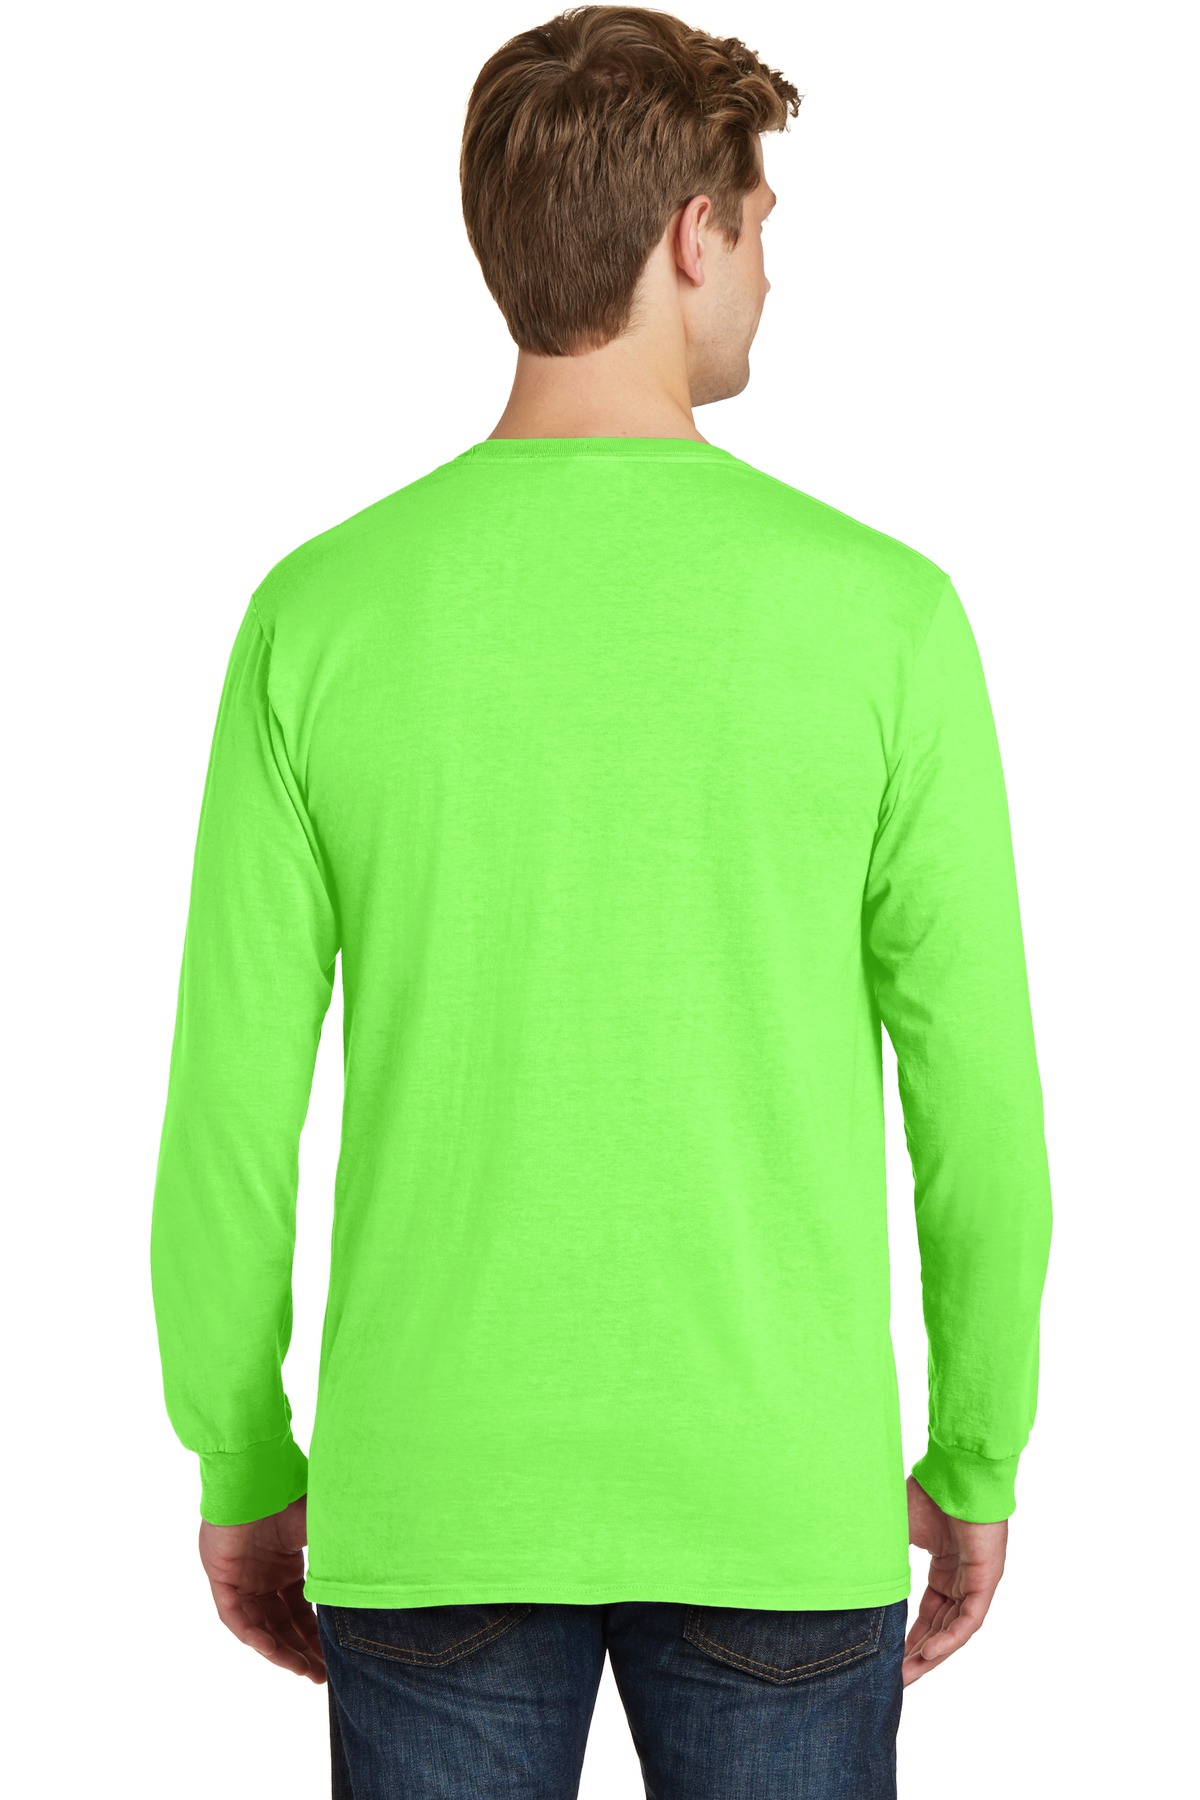 Port & Company Pigment Dyed Long Sleeve Tee-XL (Neon Green) - image 2 of 6